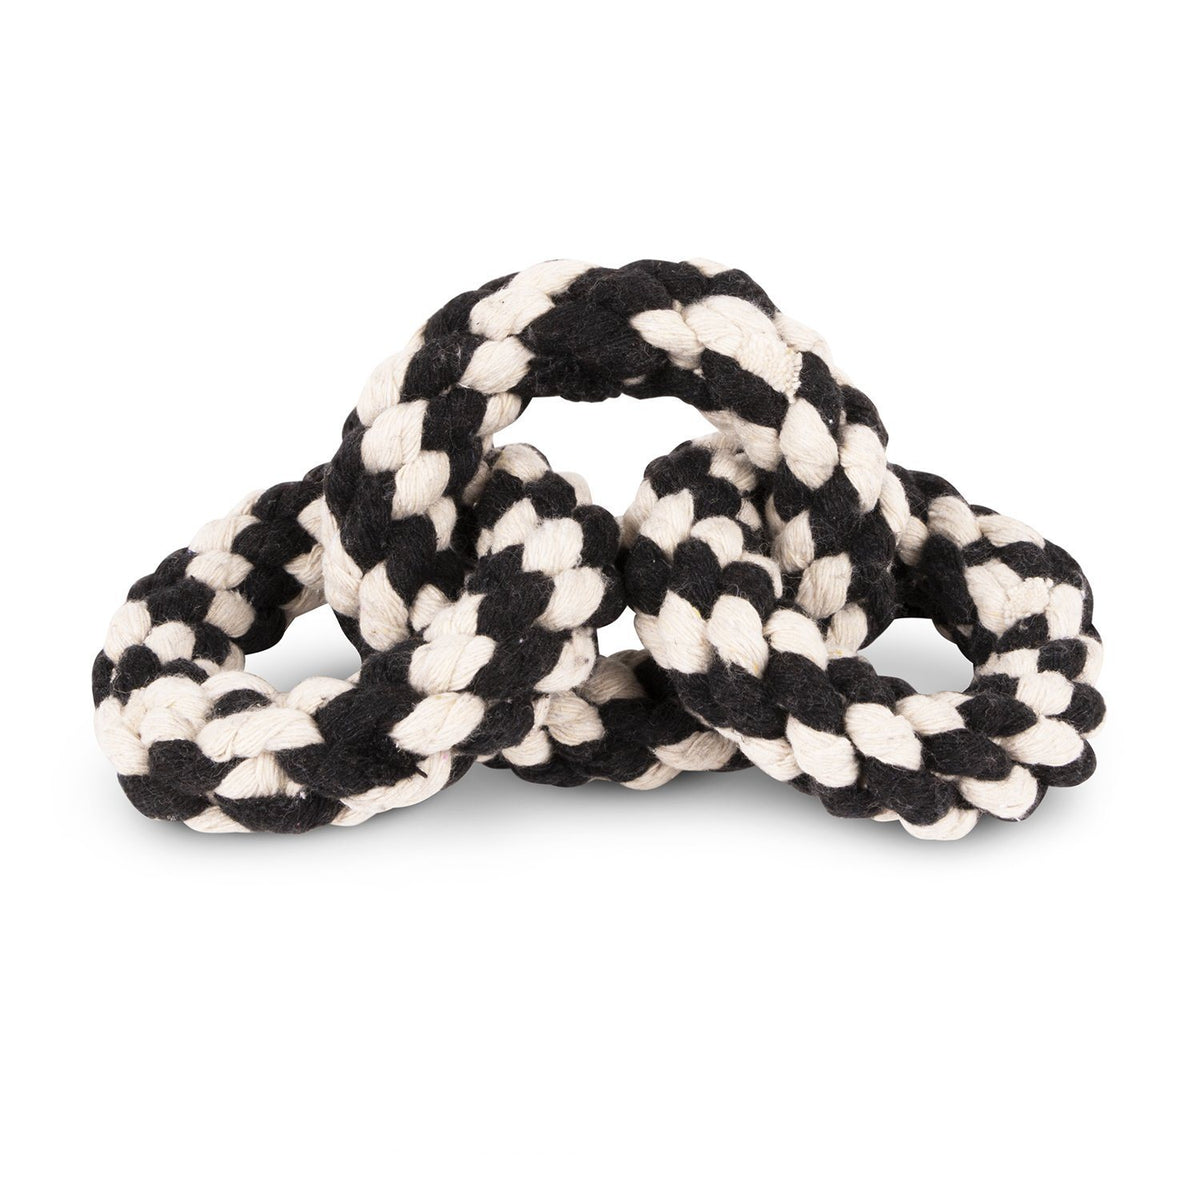 Rope Toy - Striped Tri-Ring Rope Dog Toy